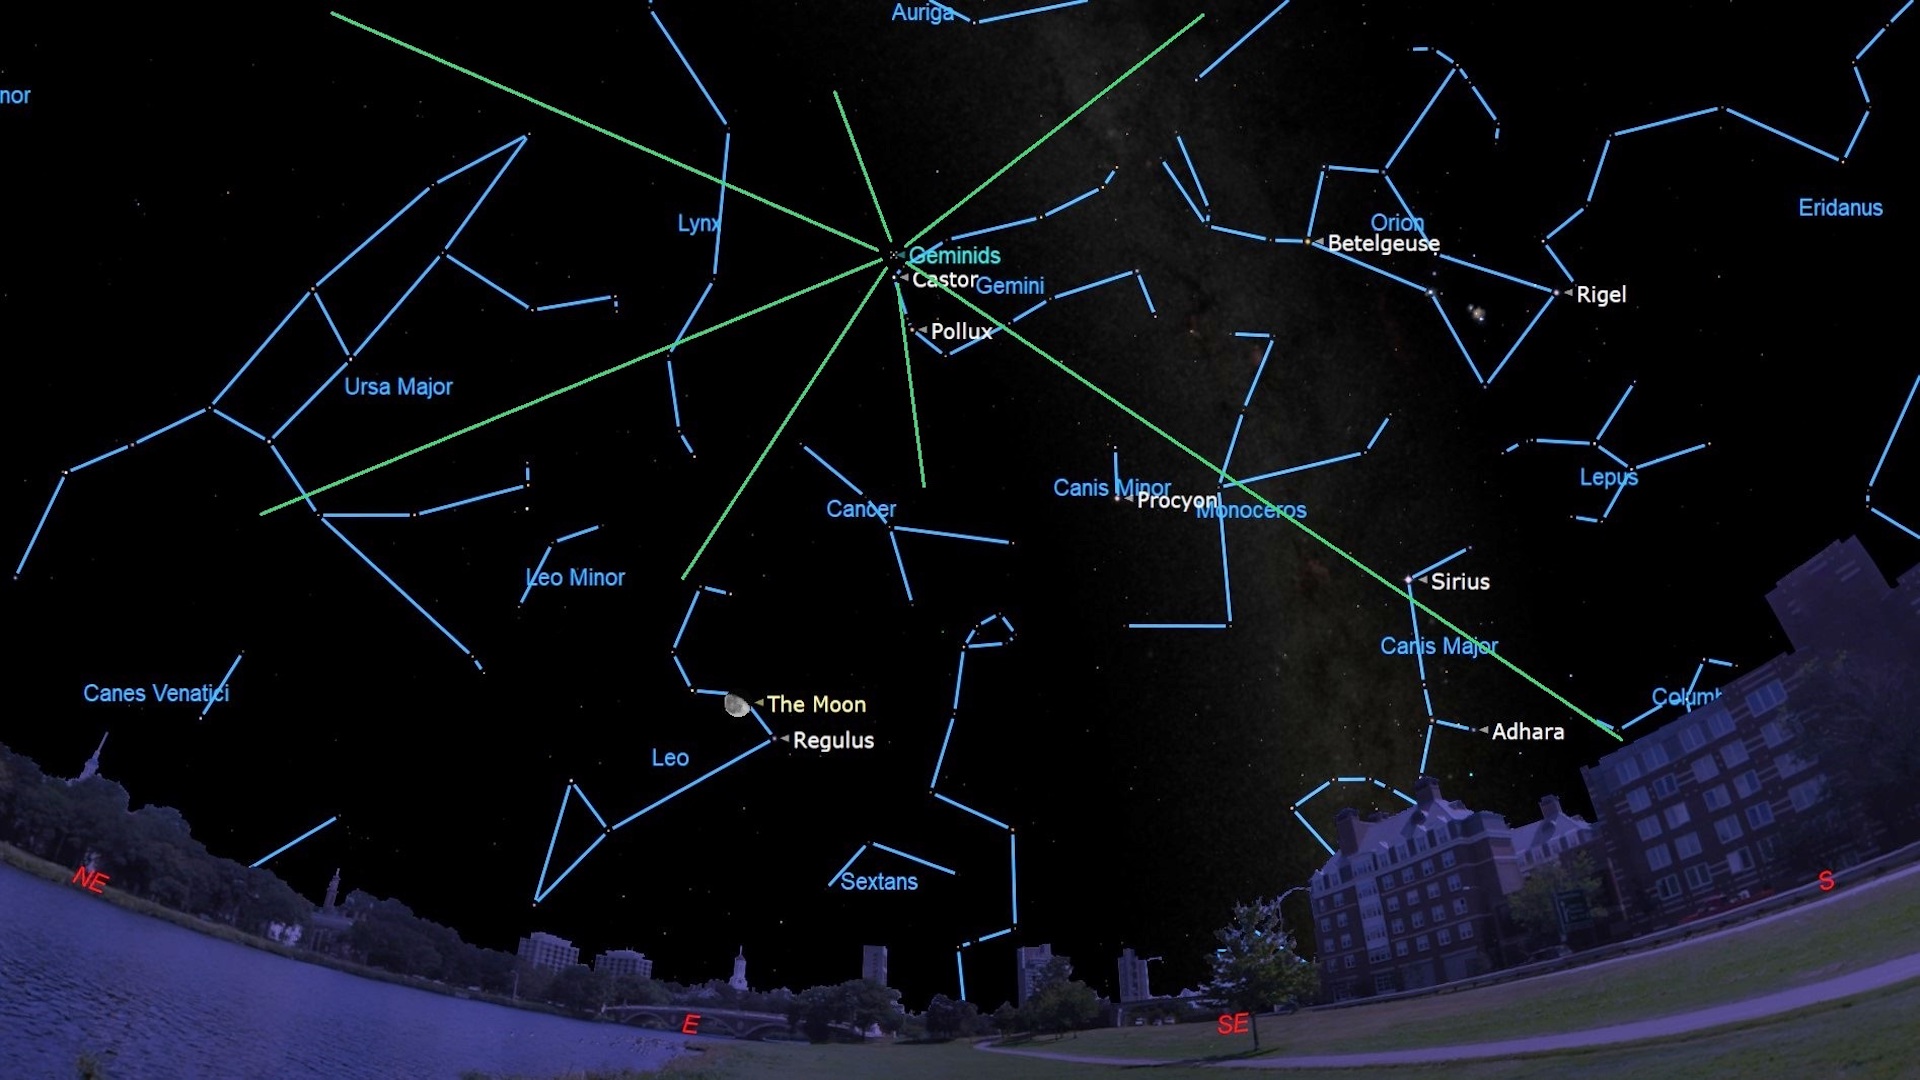 An illustration of the night sky on Dec. 13 showing the Geminid meteor shower originating from near the bright star Castor in the constellation of Gemini.